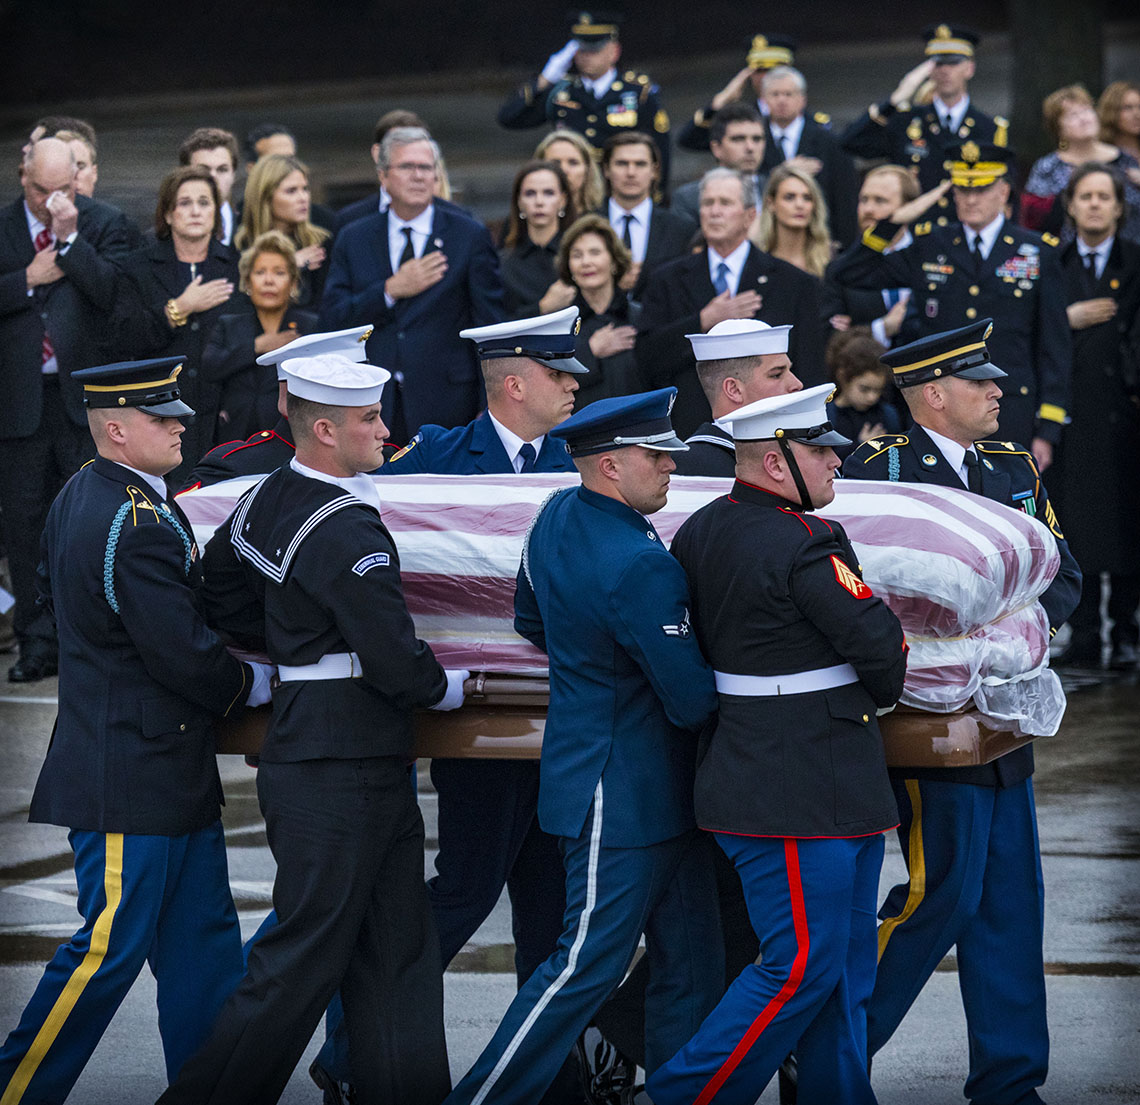 George Bush Casket carried by Honor Guard George H. W. Bush funeral at Texas A&M  by Scott Dobry Pictures photographer in Omaha, Nebraska